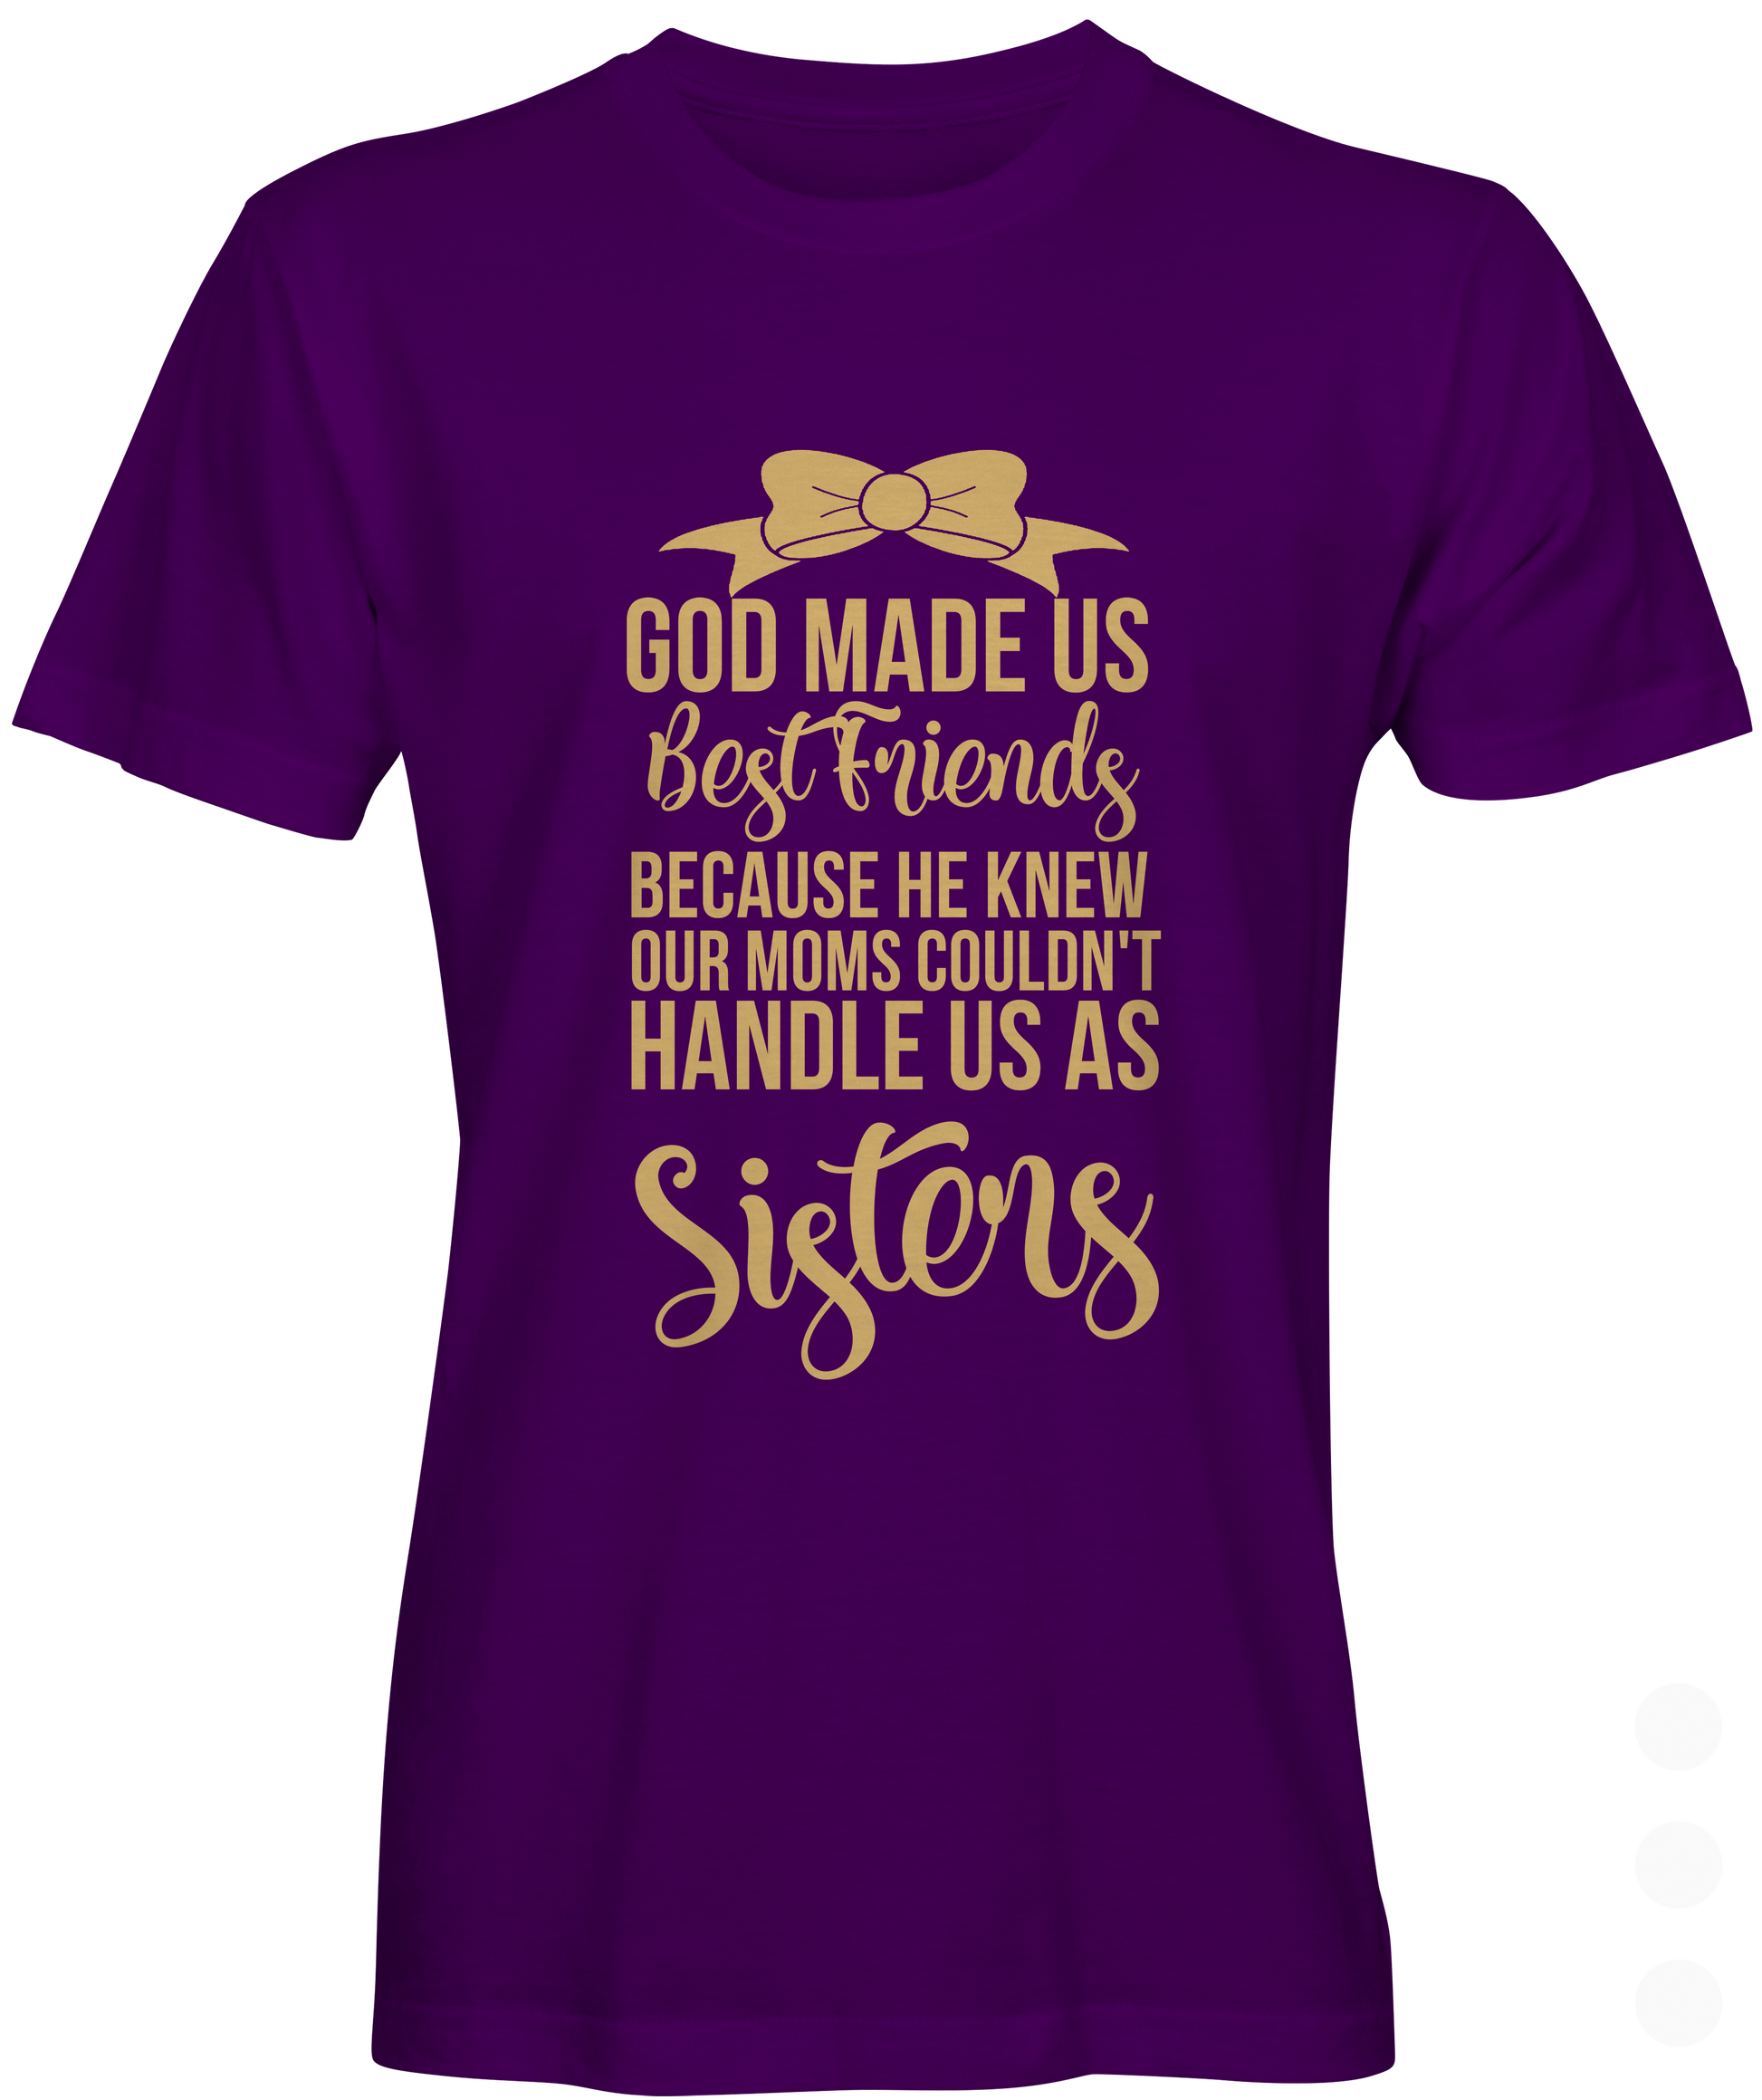 Purple t-shirt with words